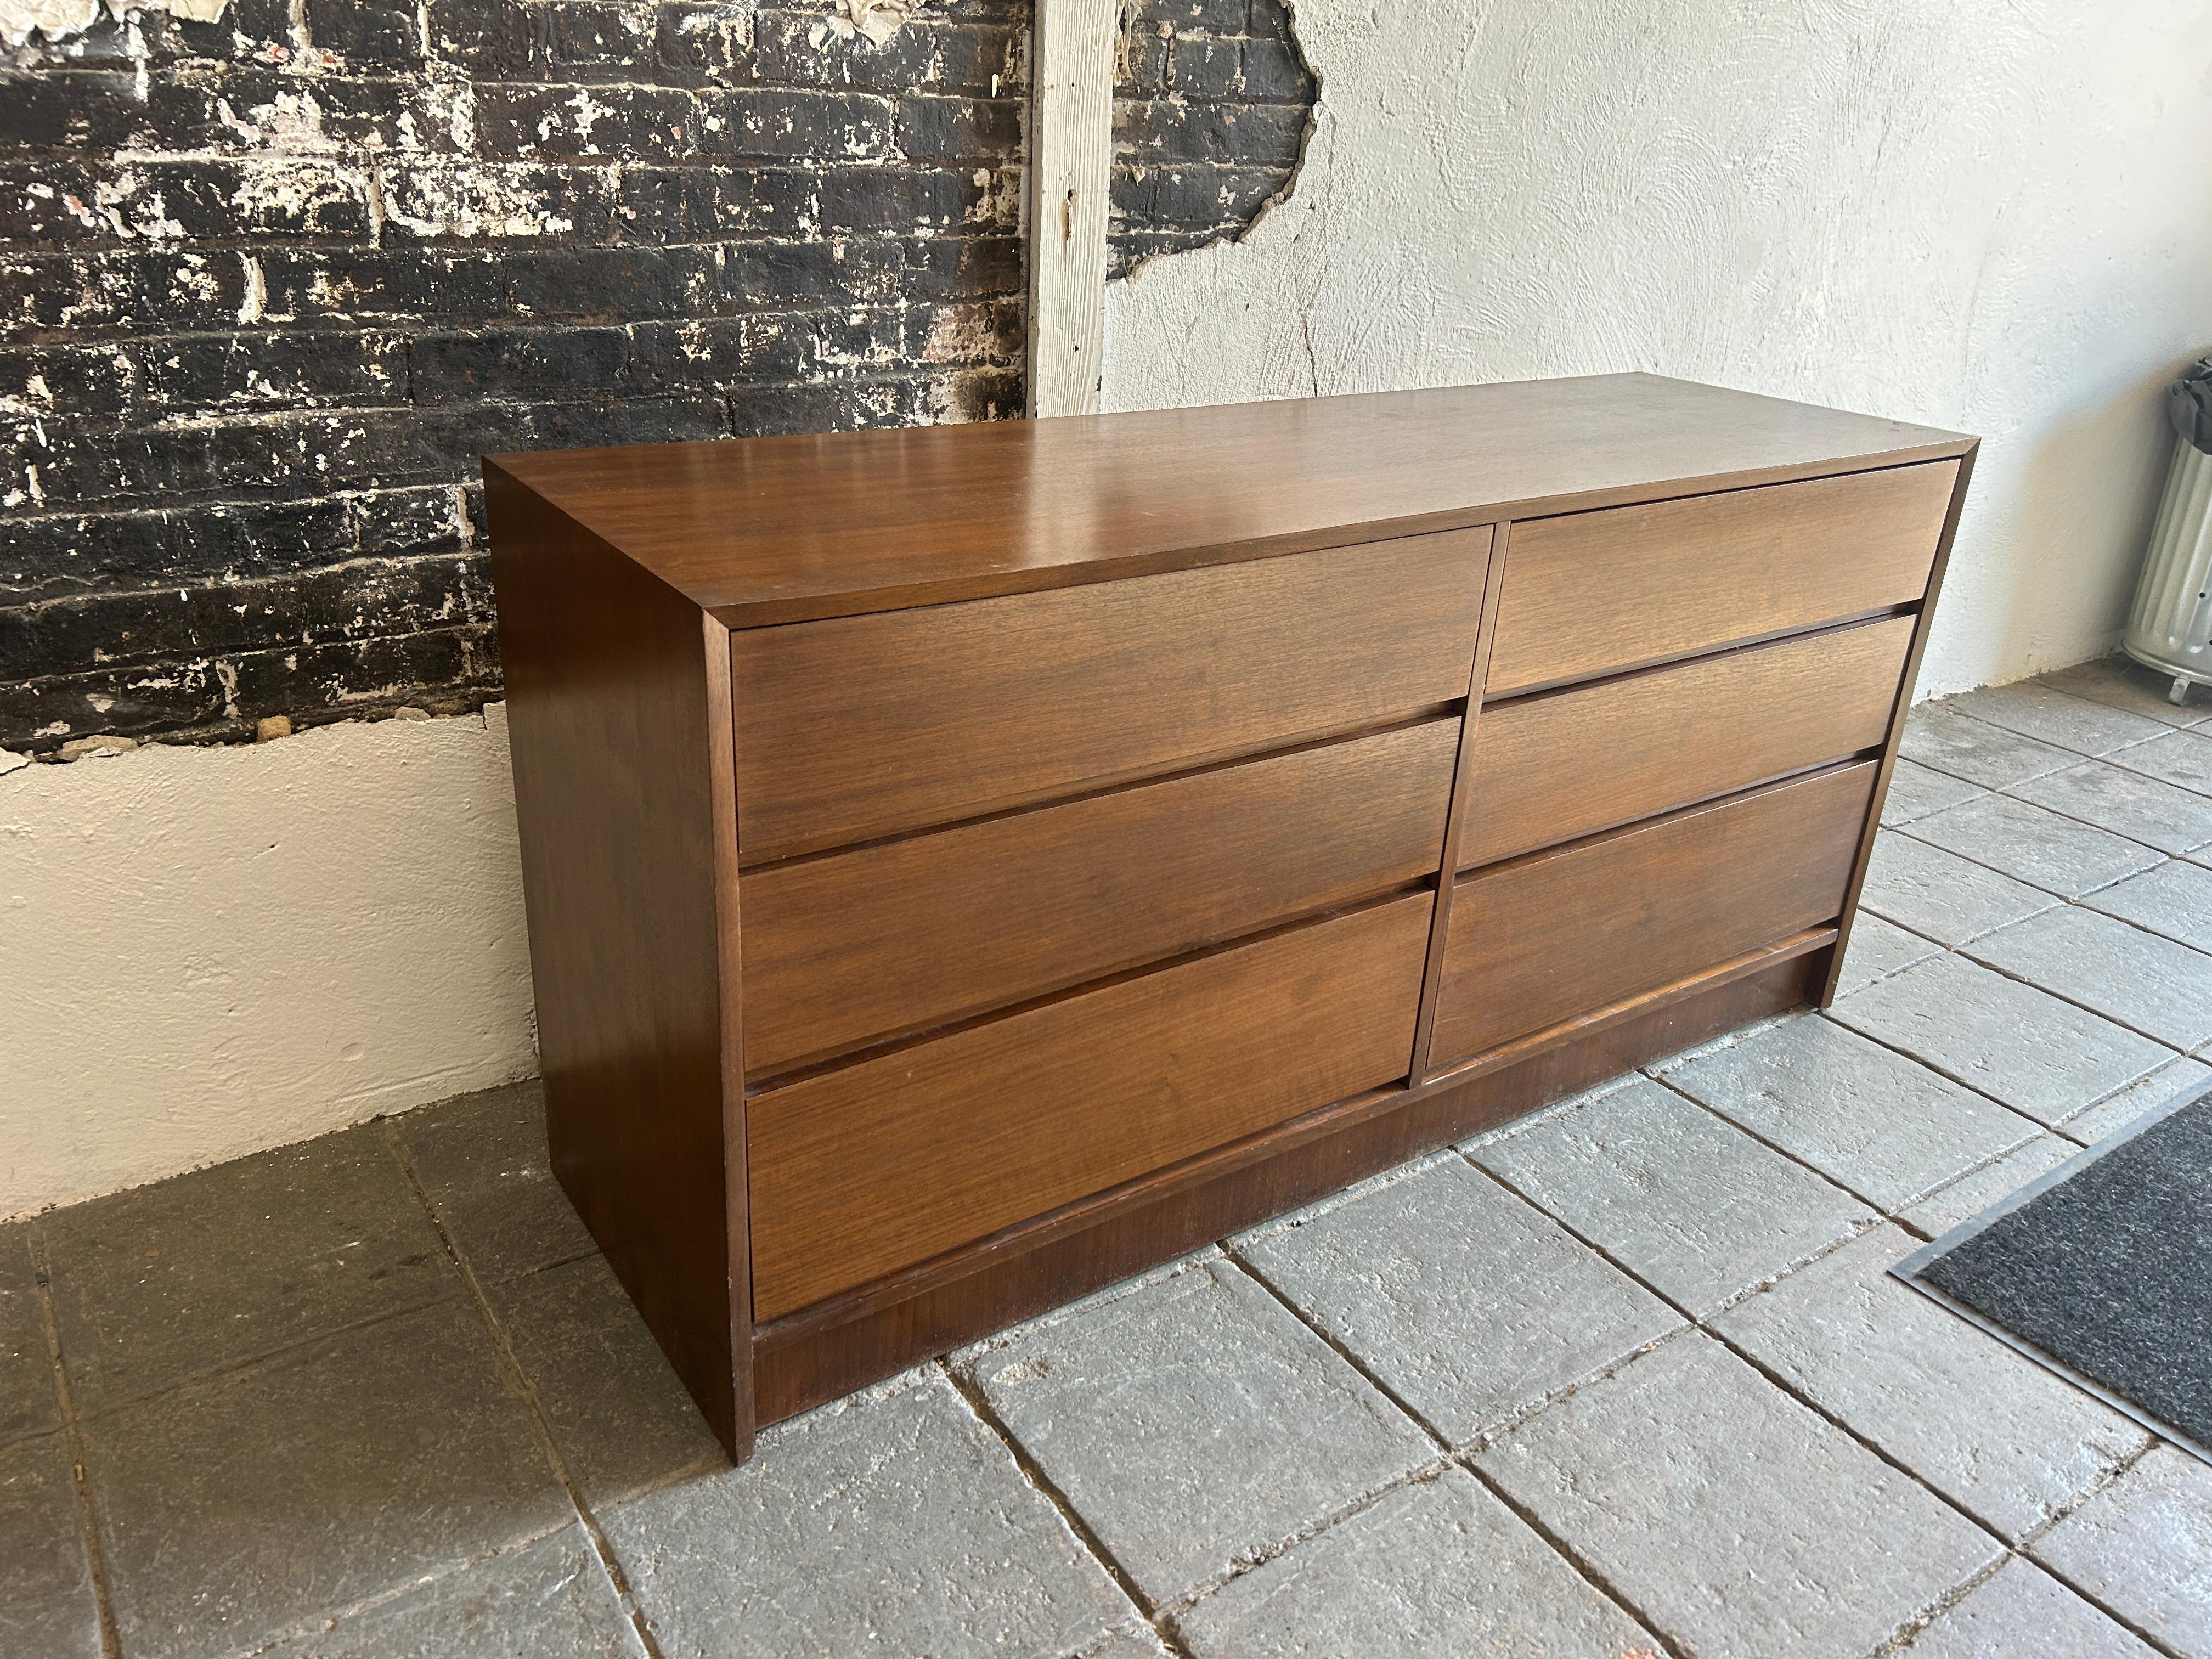 Mid century post modern 6 drawer simple walnut dresser. Simple designed walnut veneer dresser over birch construction. All drawers are solid birch and are very well constructed. Dark brown walnut finish. Very clean inside and out. Made in Poland.